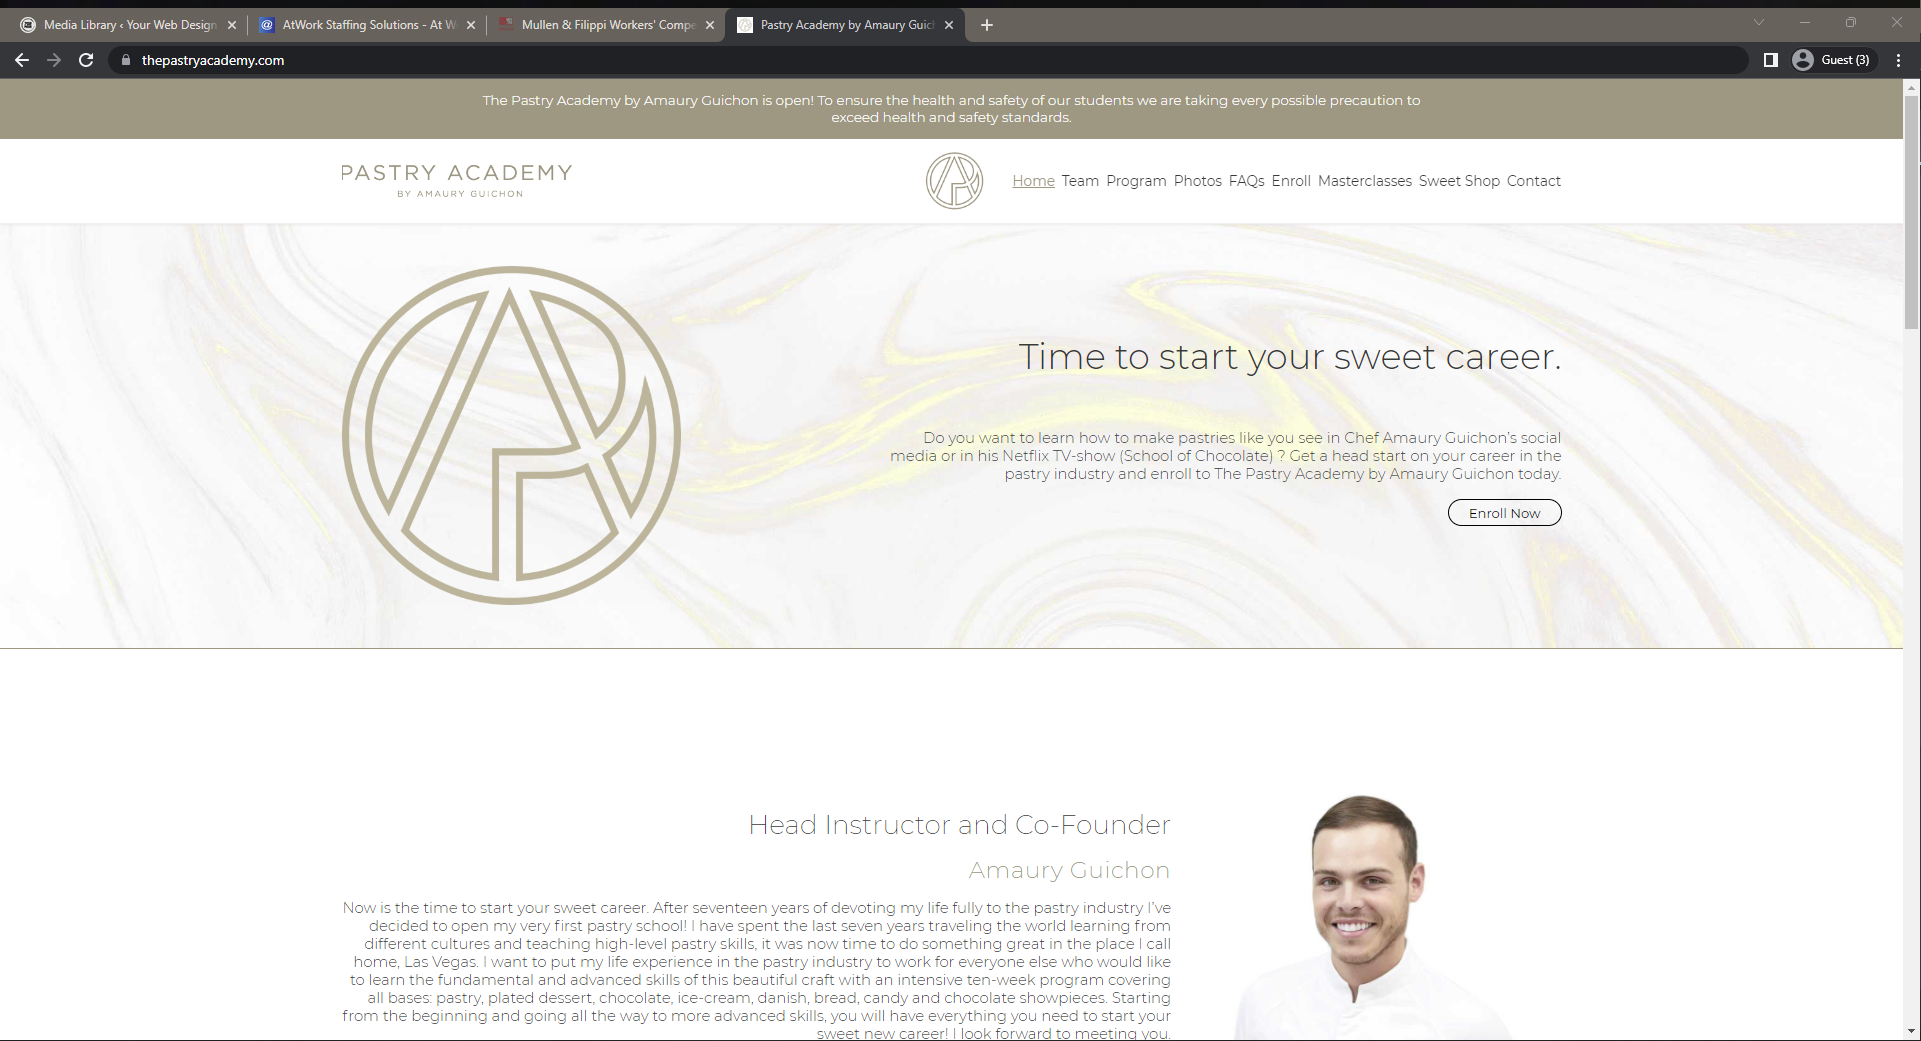 The Pastry Academy Website Design by 702 Pros - Web Design Wichita Falls, TX